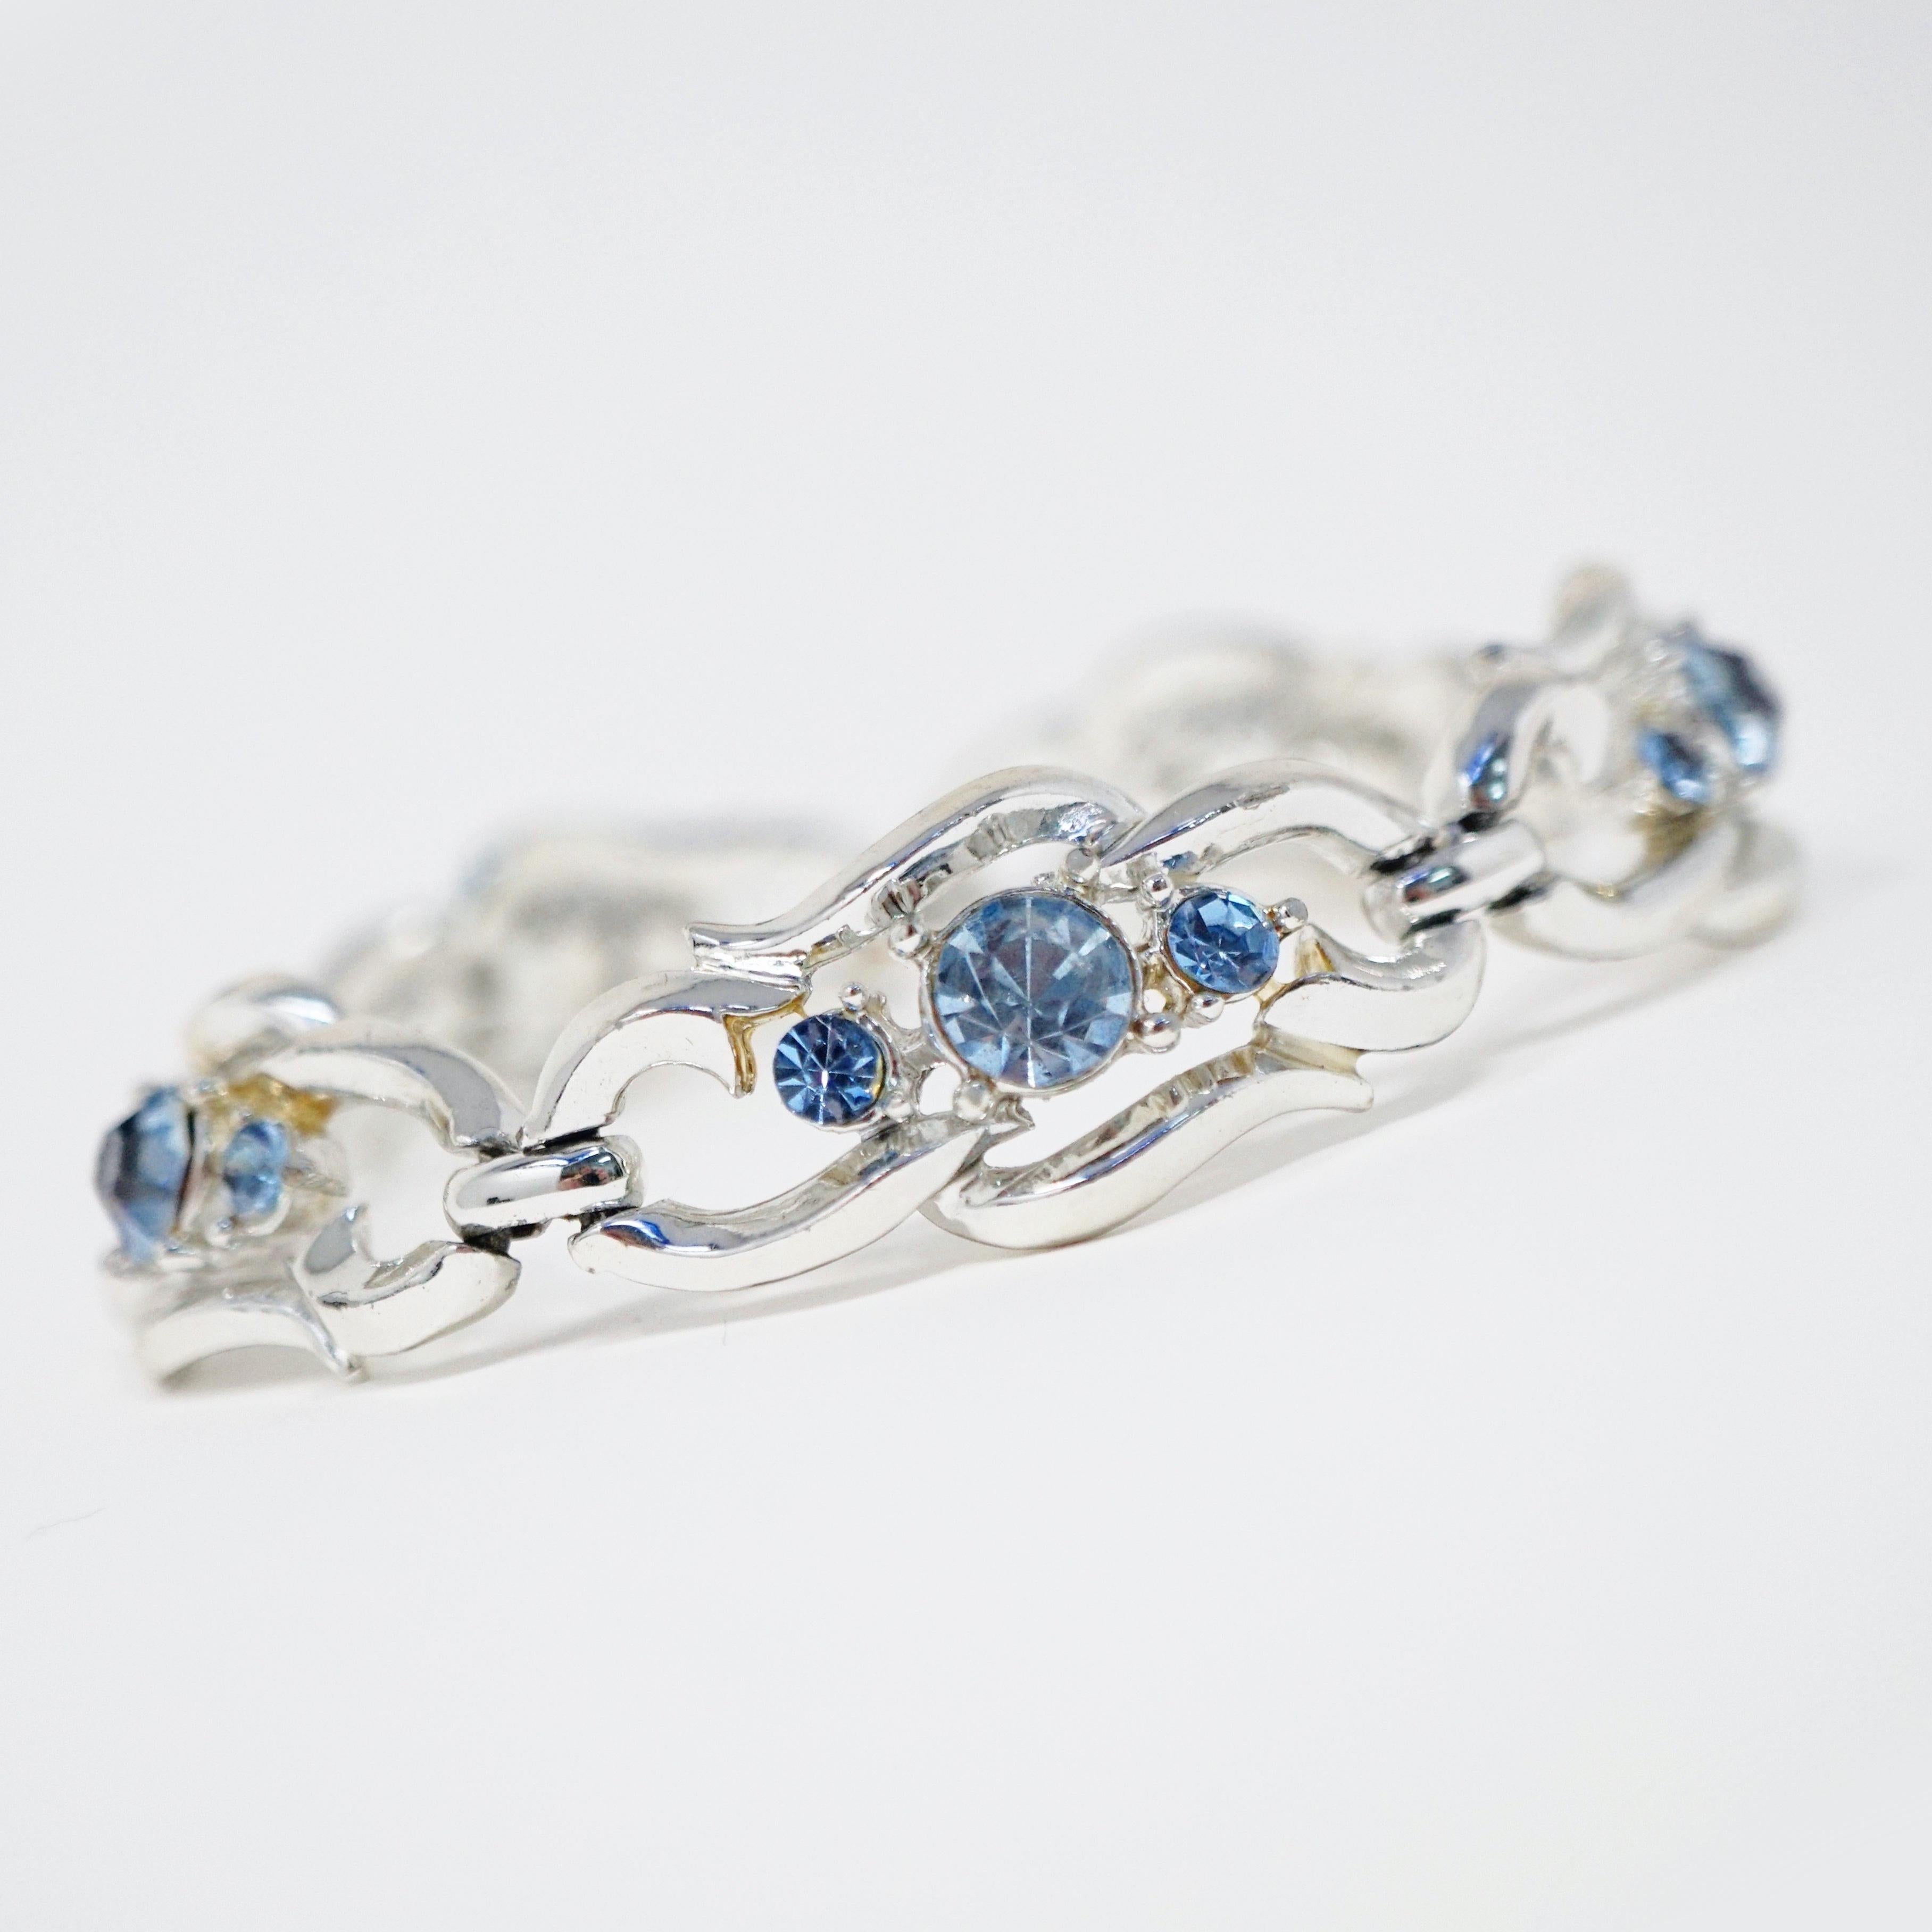 This gorgeous baby blue rhinestone bracelet by Coro, circa 1950s, is absolutely dreamy.  Rhodium plating and high quality crystal rhinestones will make your wrist sparkle and shine!  A wonderful 